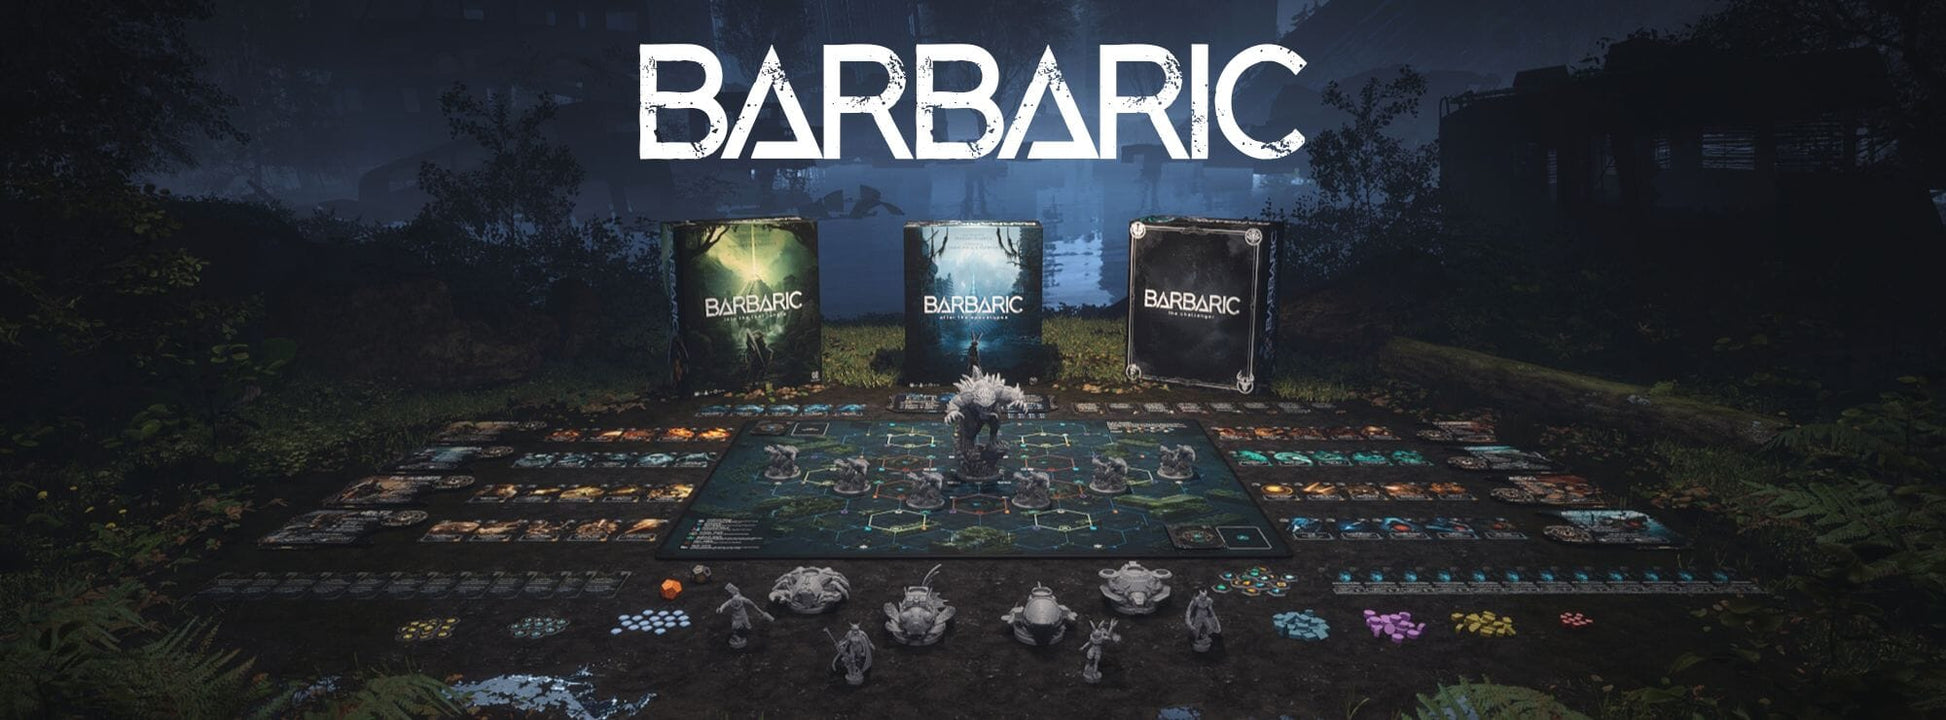 Barbaric - All-In Set Board Games Hexa House 